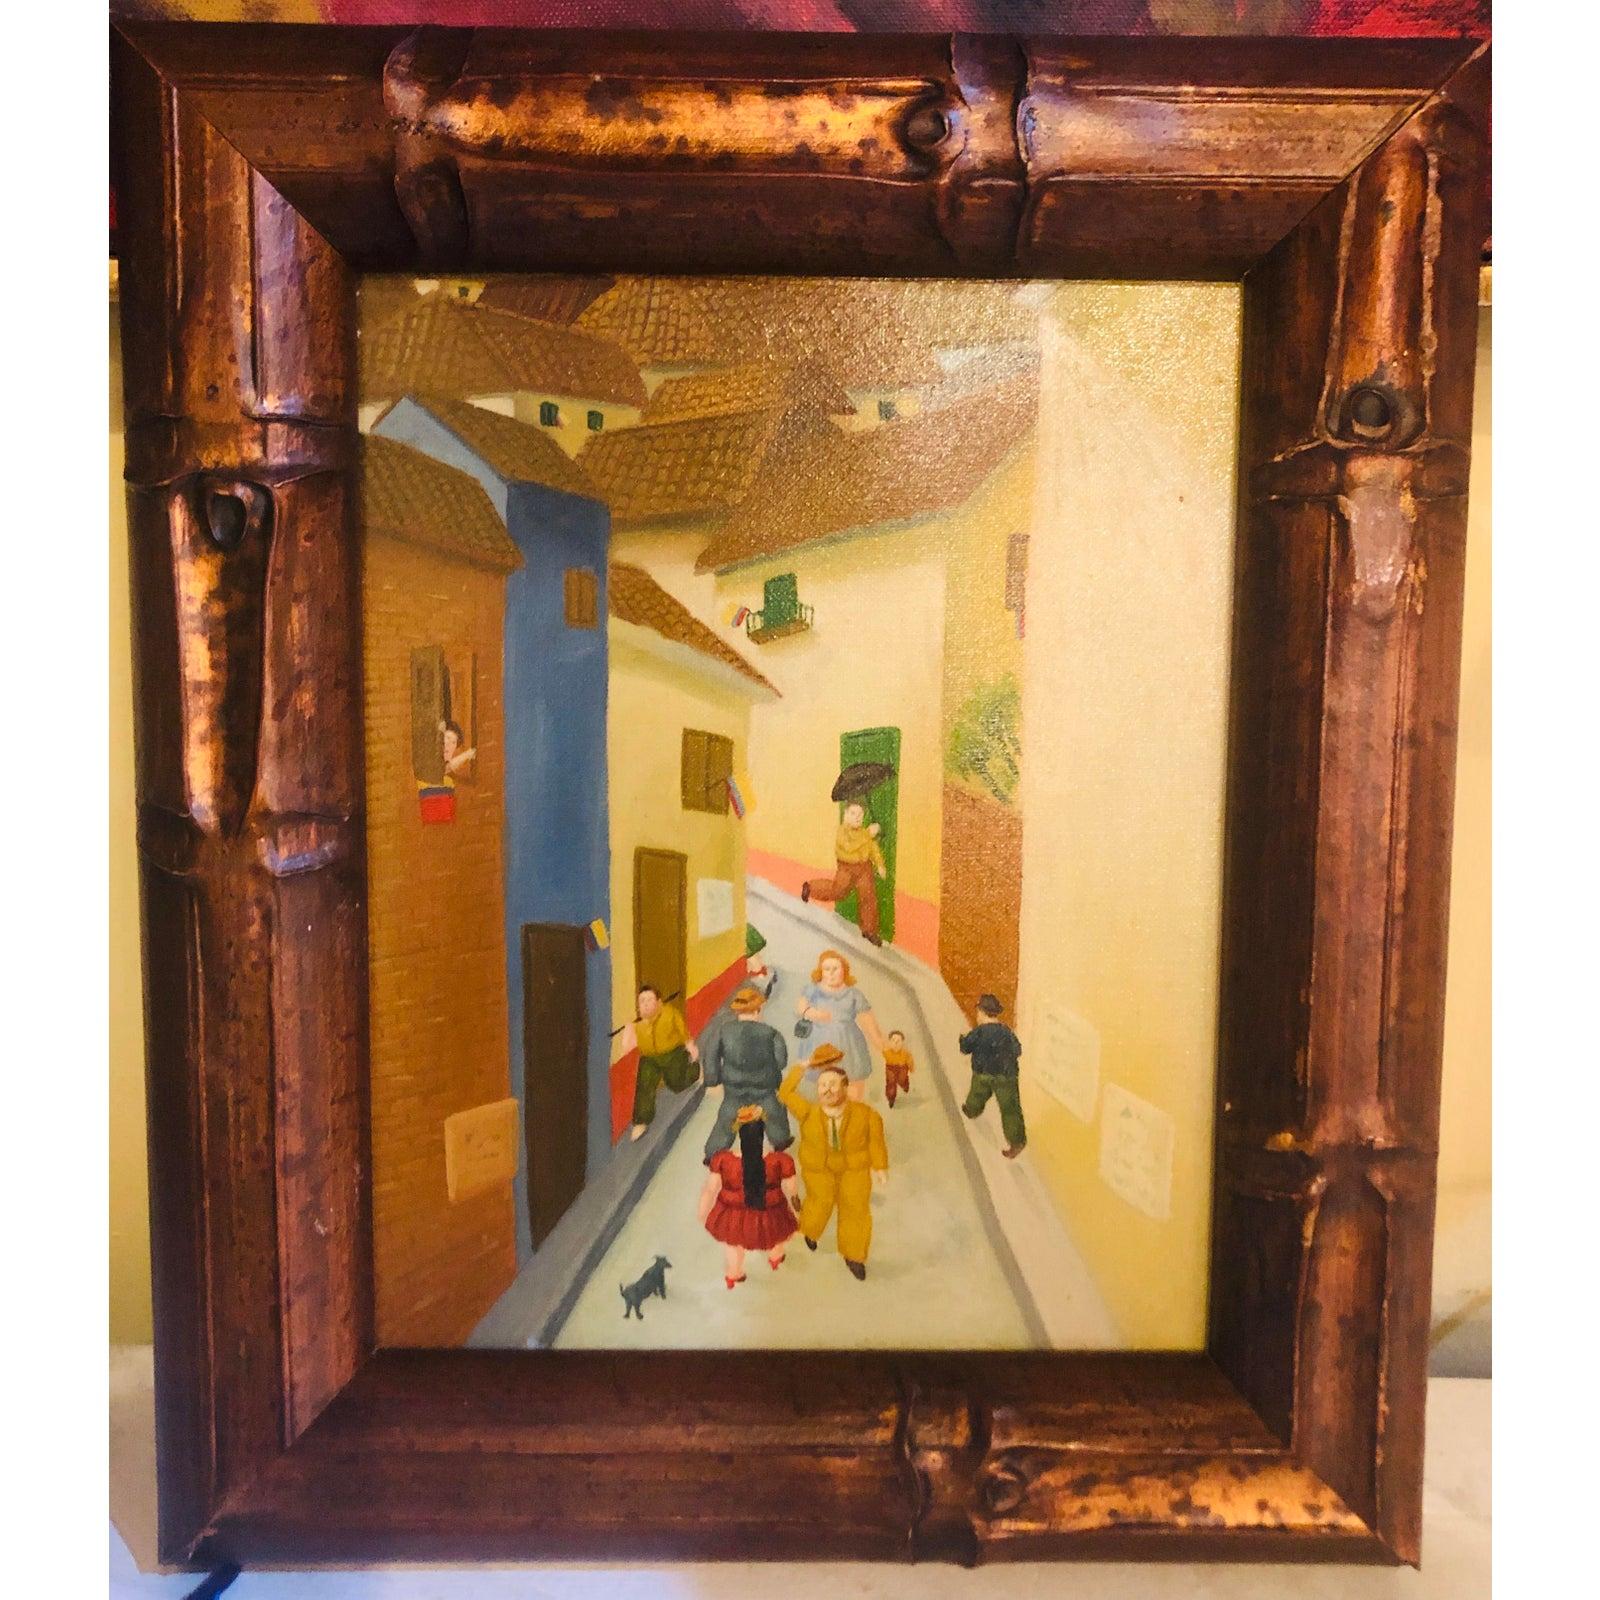 Oil on canvas street scene
The painting features a scene street of a family in a vibrant street. The wood frame is nicely carved. This painting is delightful and will add warmth and a touch of life to your wall decor.  

Dimensions: Framed 13.5